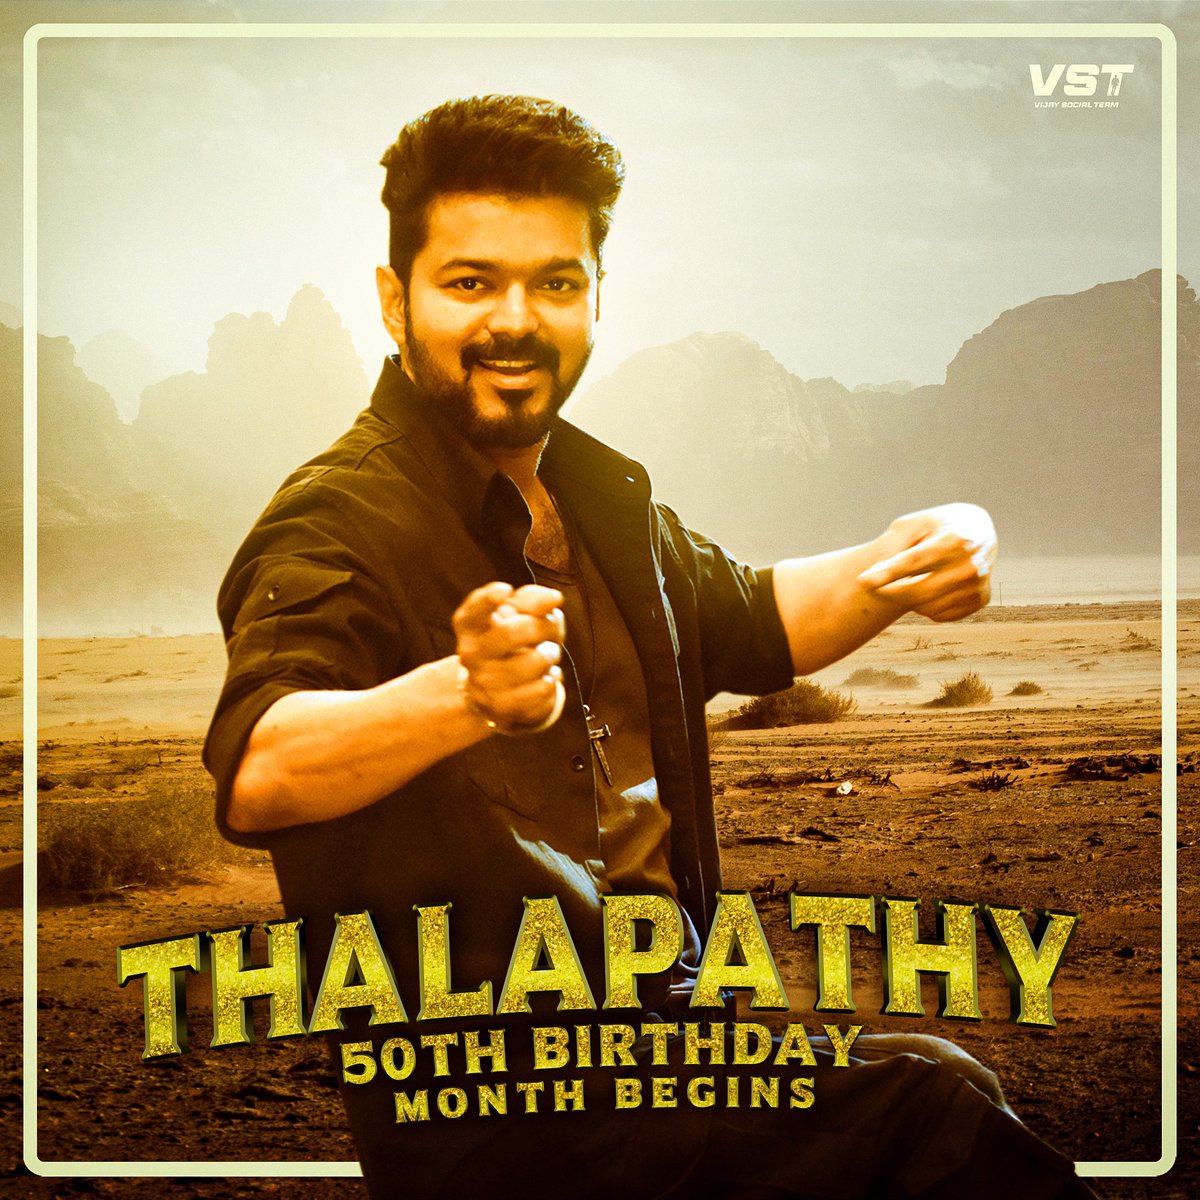 #Thalapathy50 Birthday Month Begins 🎉❤️‍🔥 Love you @actorvijay anna 🥹❤️..Once again, Advance Happy Birthday 🥰